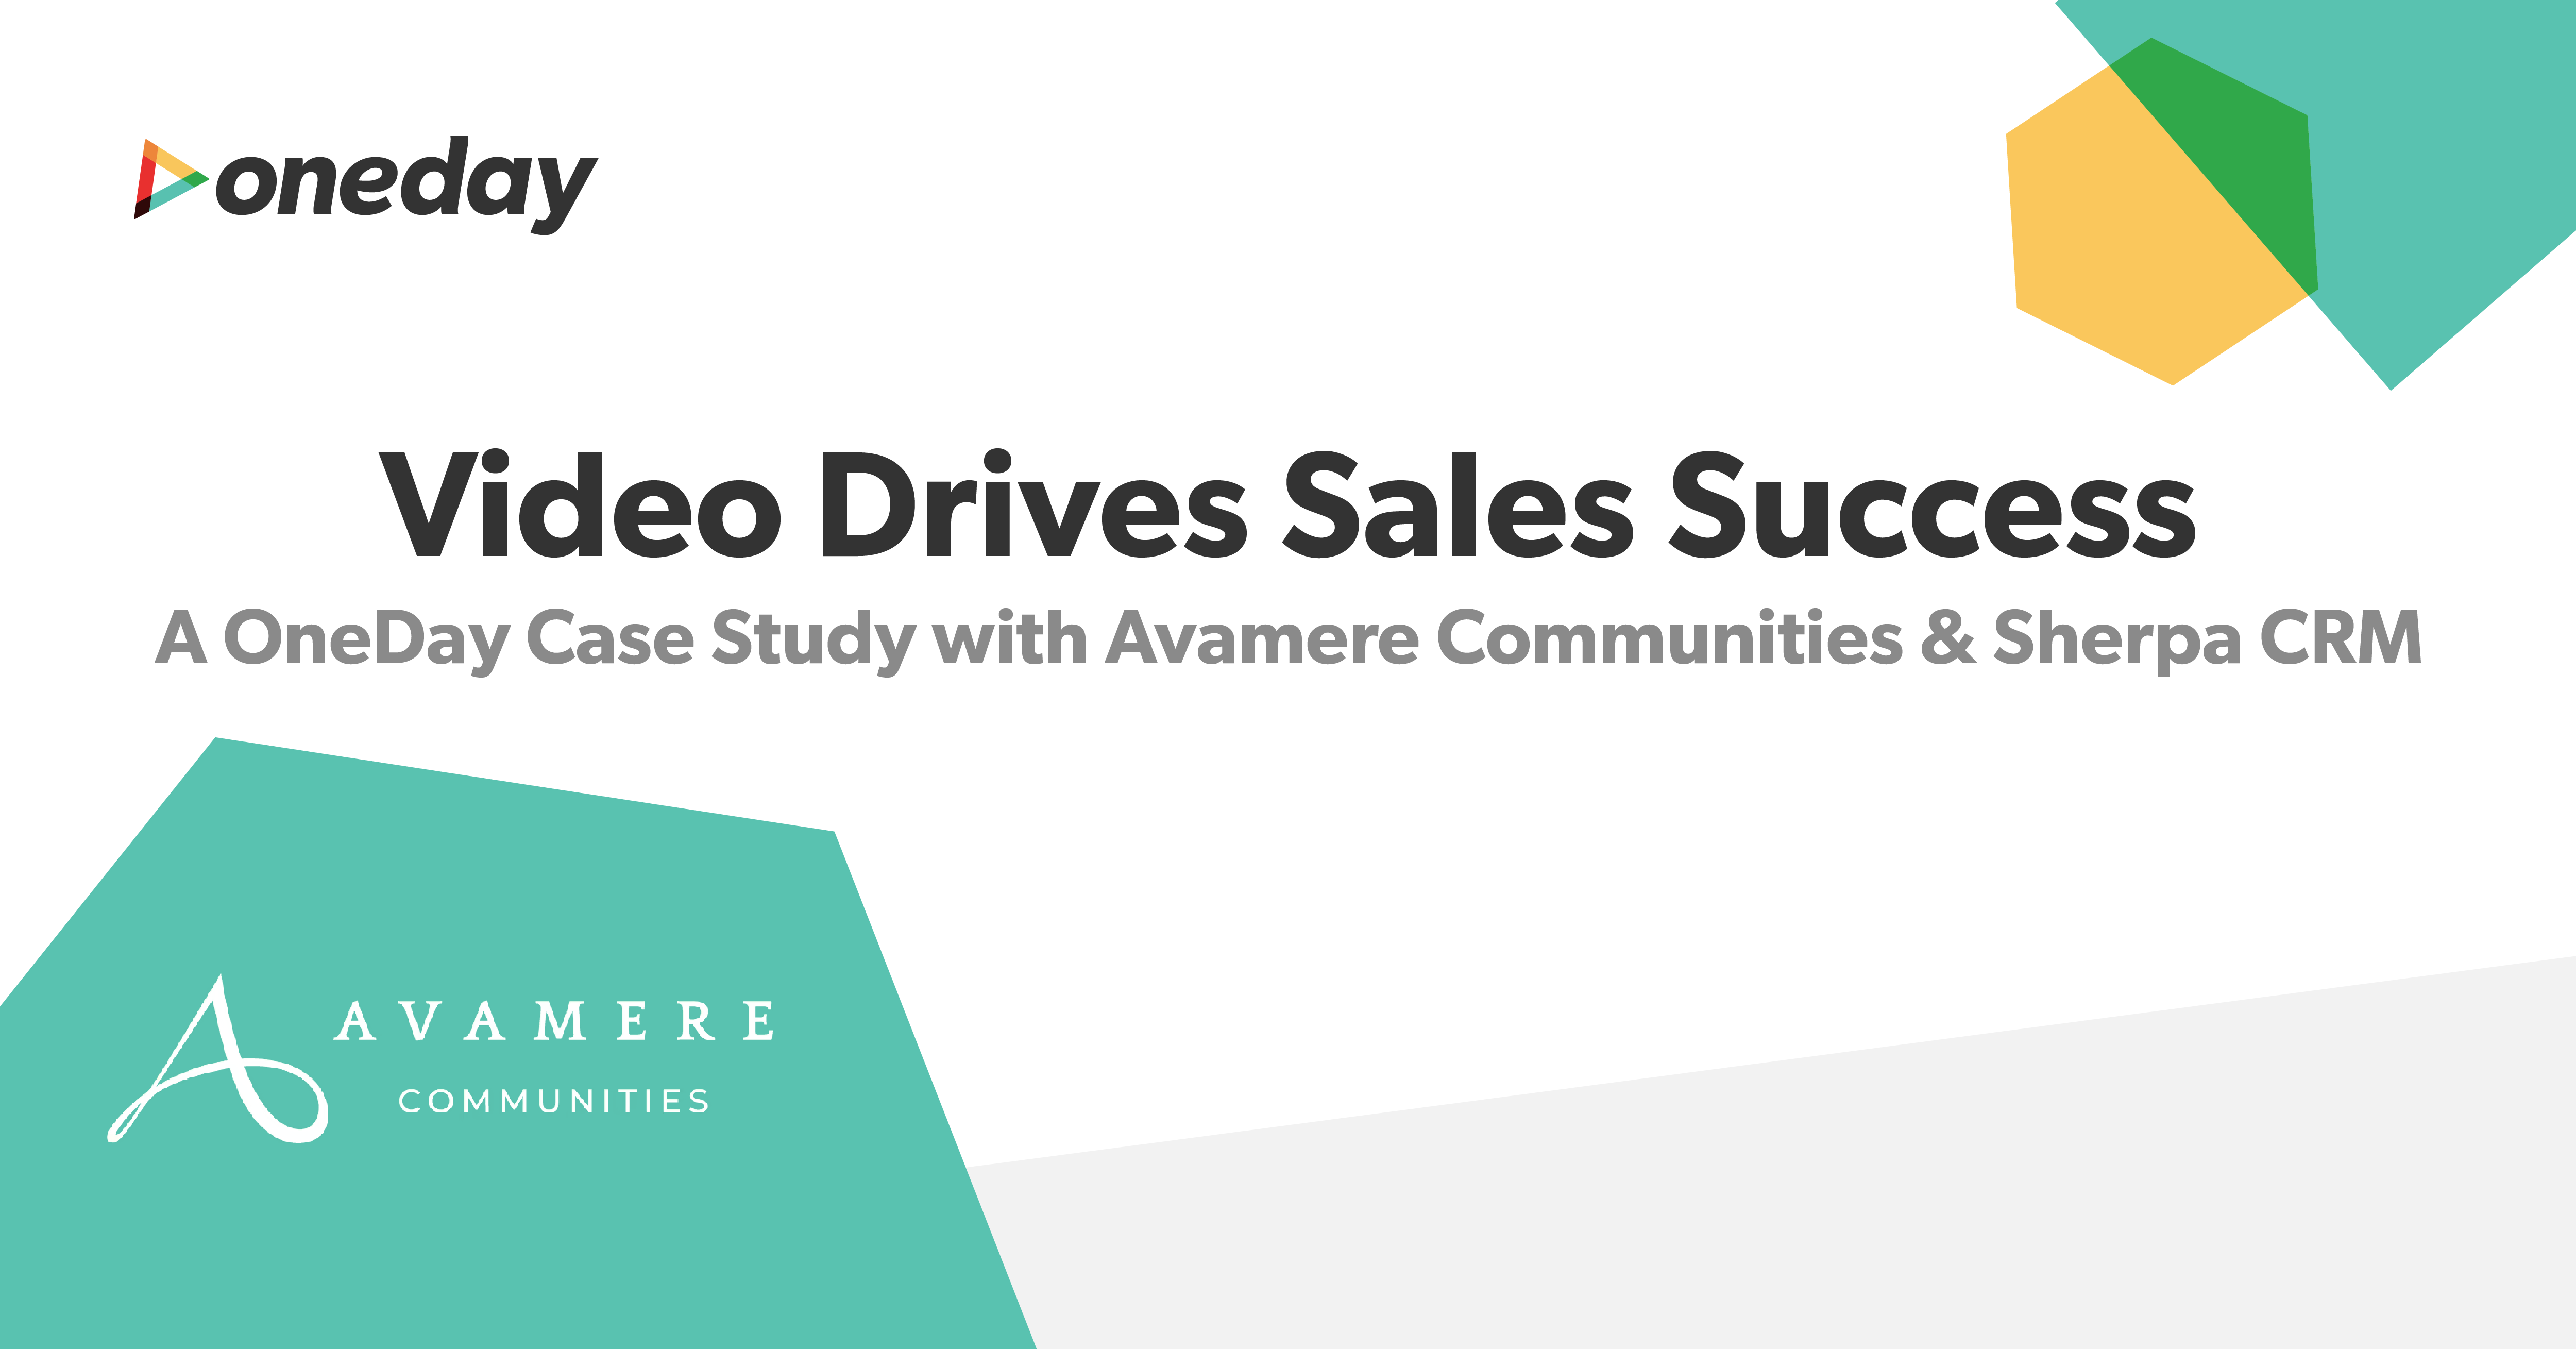 Avamere Communities partnered with OneDay, with the goal of increasing sales and finding new and creative ways to use OneDay throughout their communities.